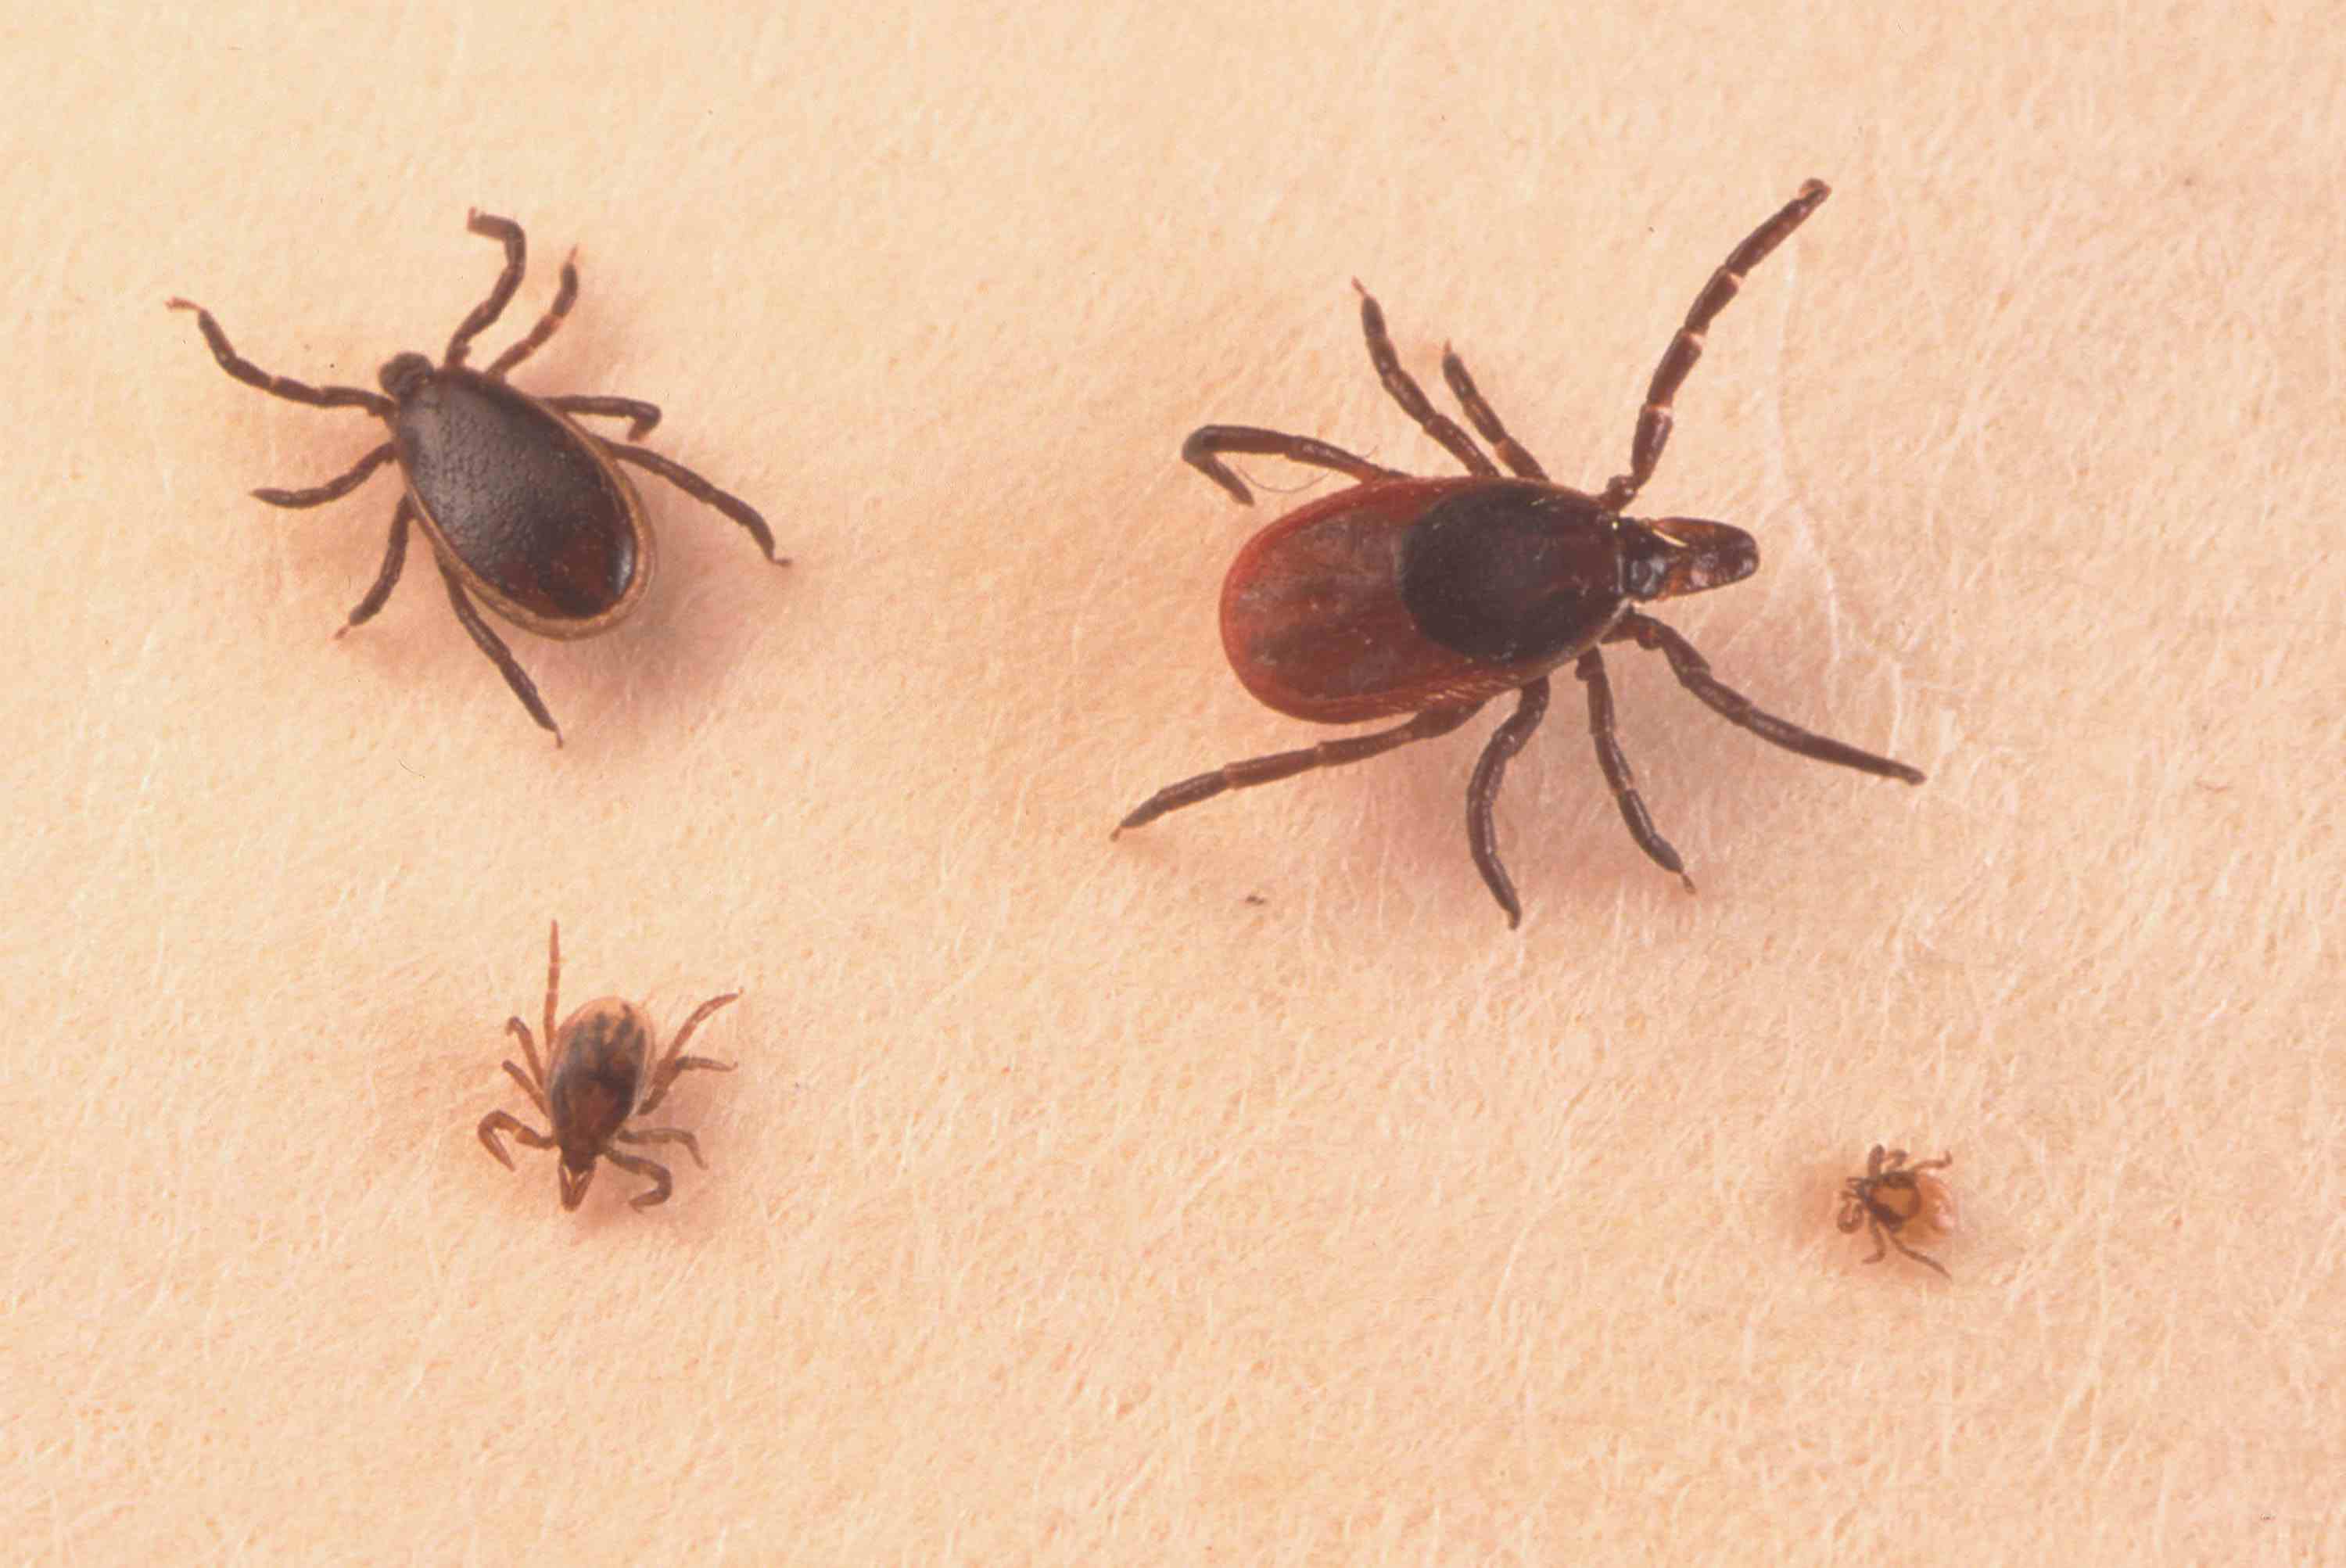 Pictures of Ticks